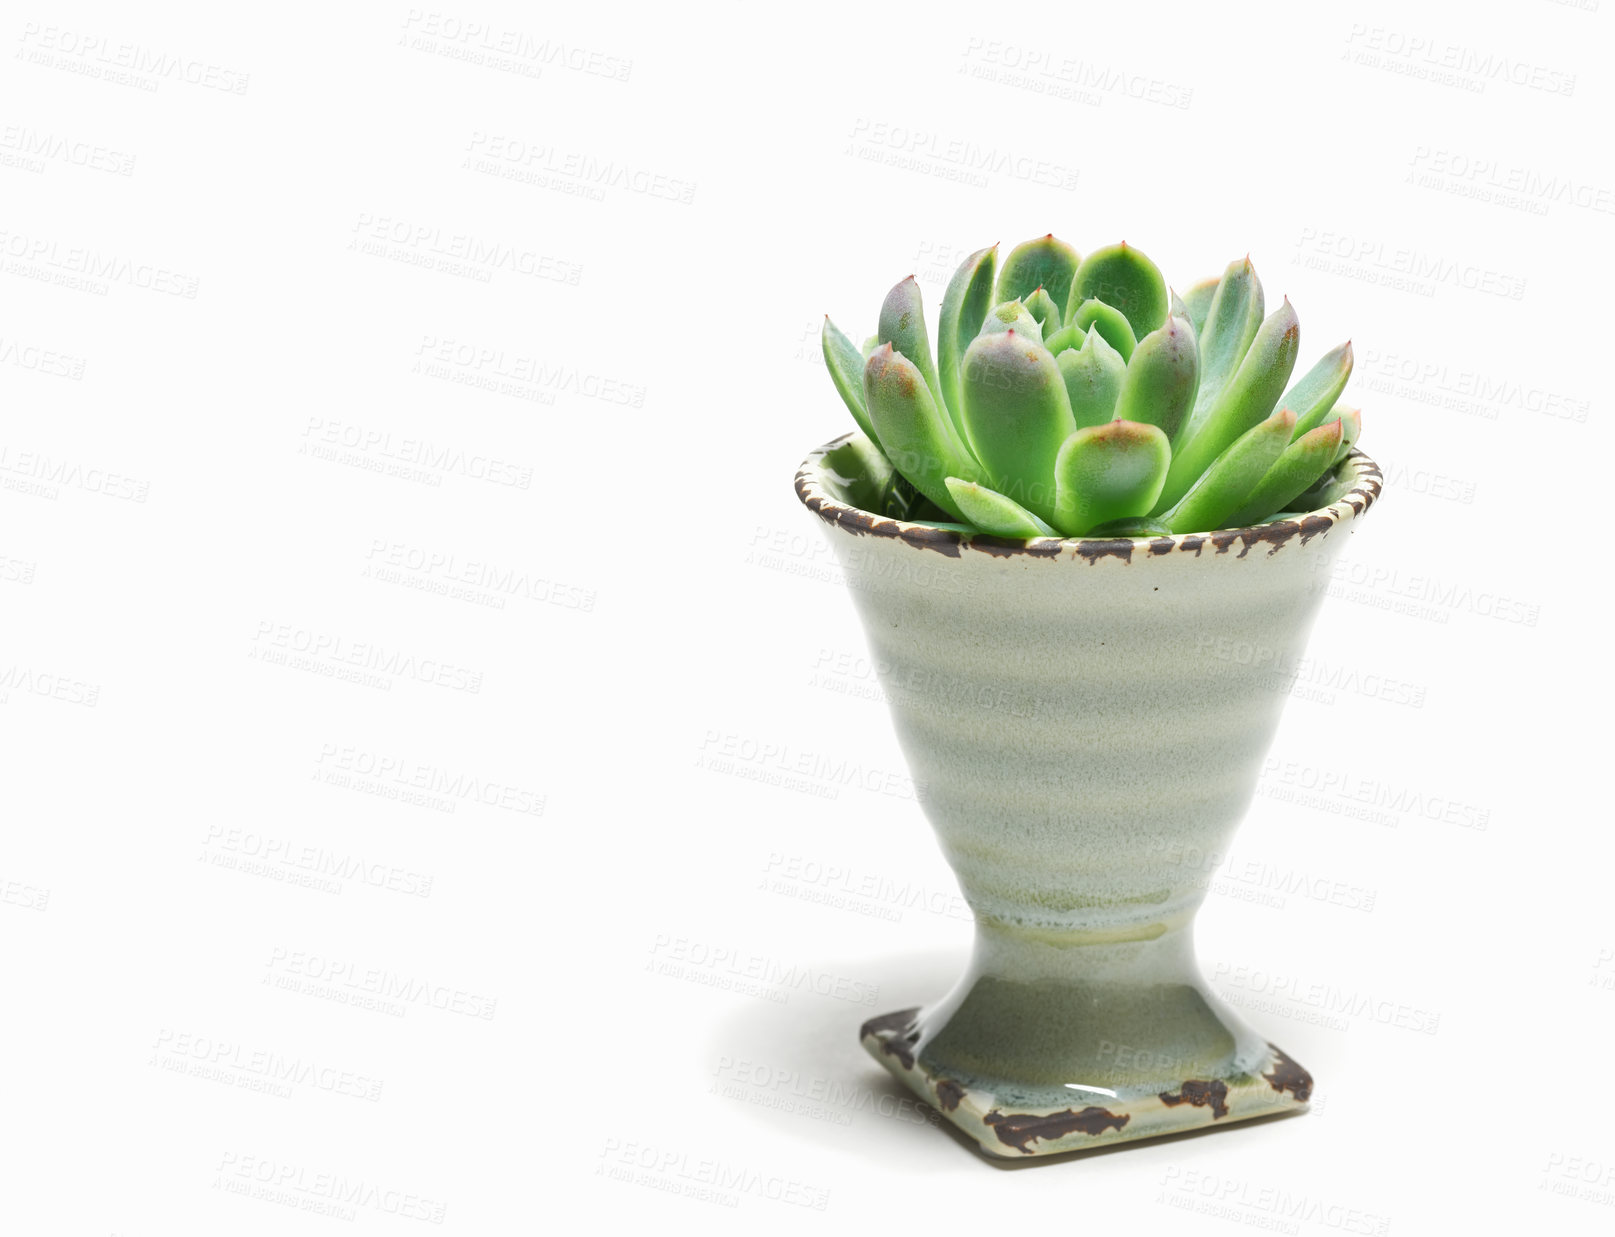 Buy stock photo Echeveria Elegans succulent flower arranged in a porcelain eggcup isolated over a white background. Indoor gardening plant inside a house. A green natural plant growing or decorating a home  